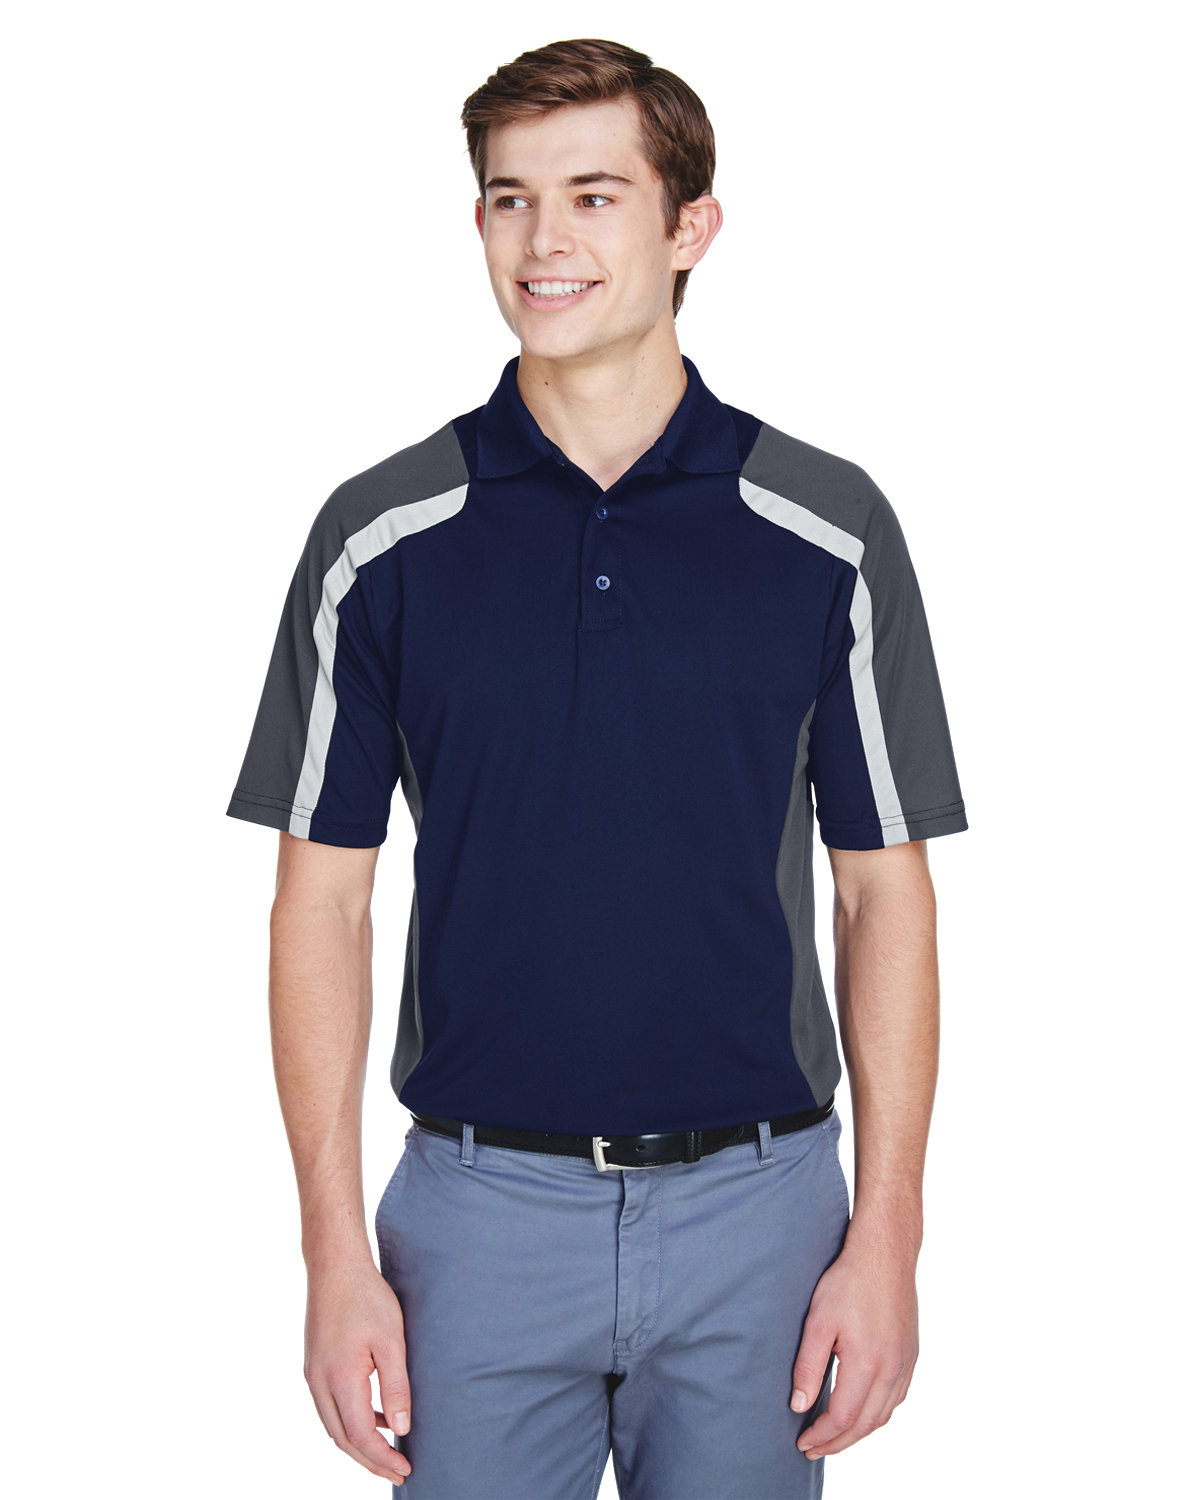 Extreme Men's Eperformance™ Strike Colorblock Snag Protection Polo CLASSIC NAVY 